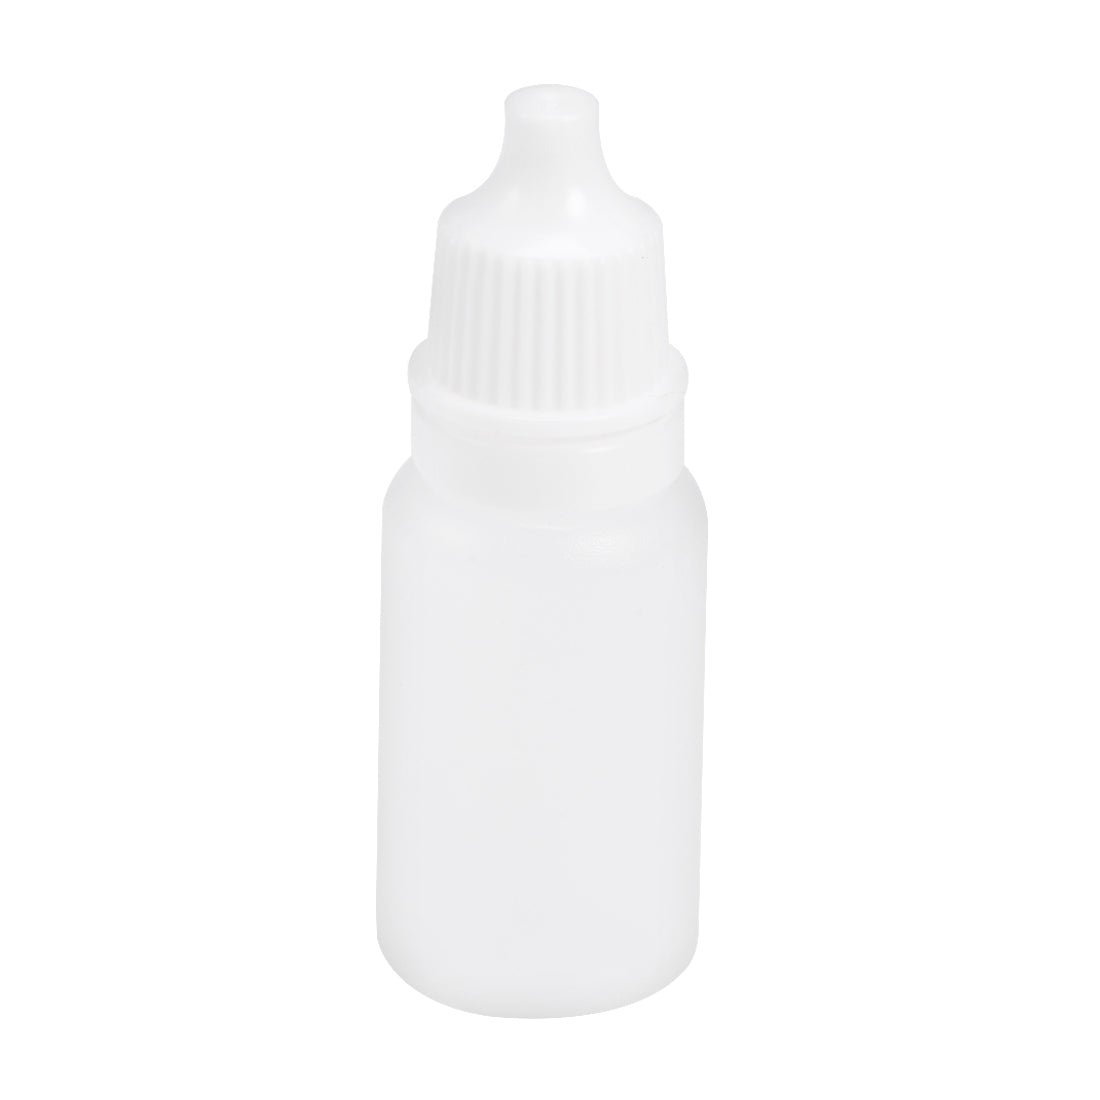 uxcell Uxcell 10ml/0.34 oz Empty Squeezable Dropper Bottle 50pcs